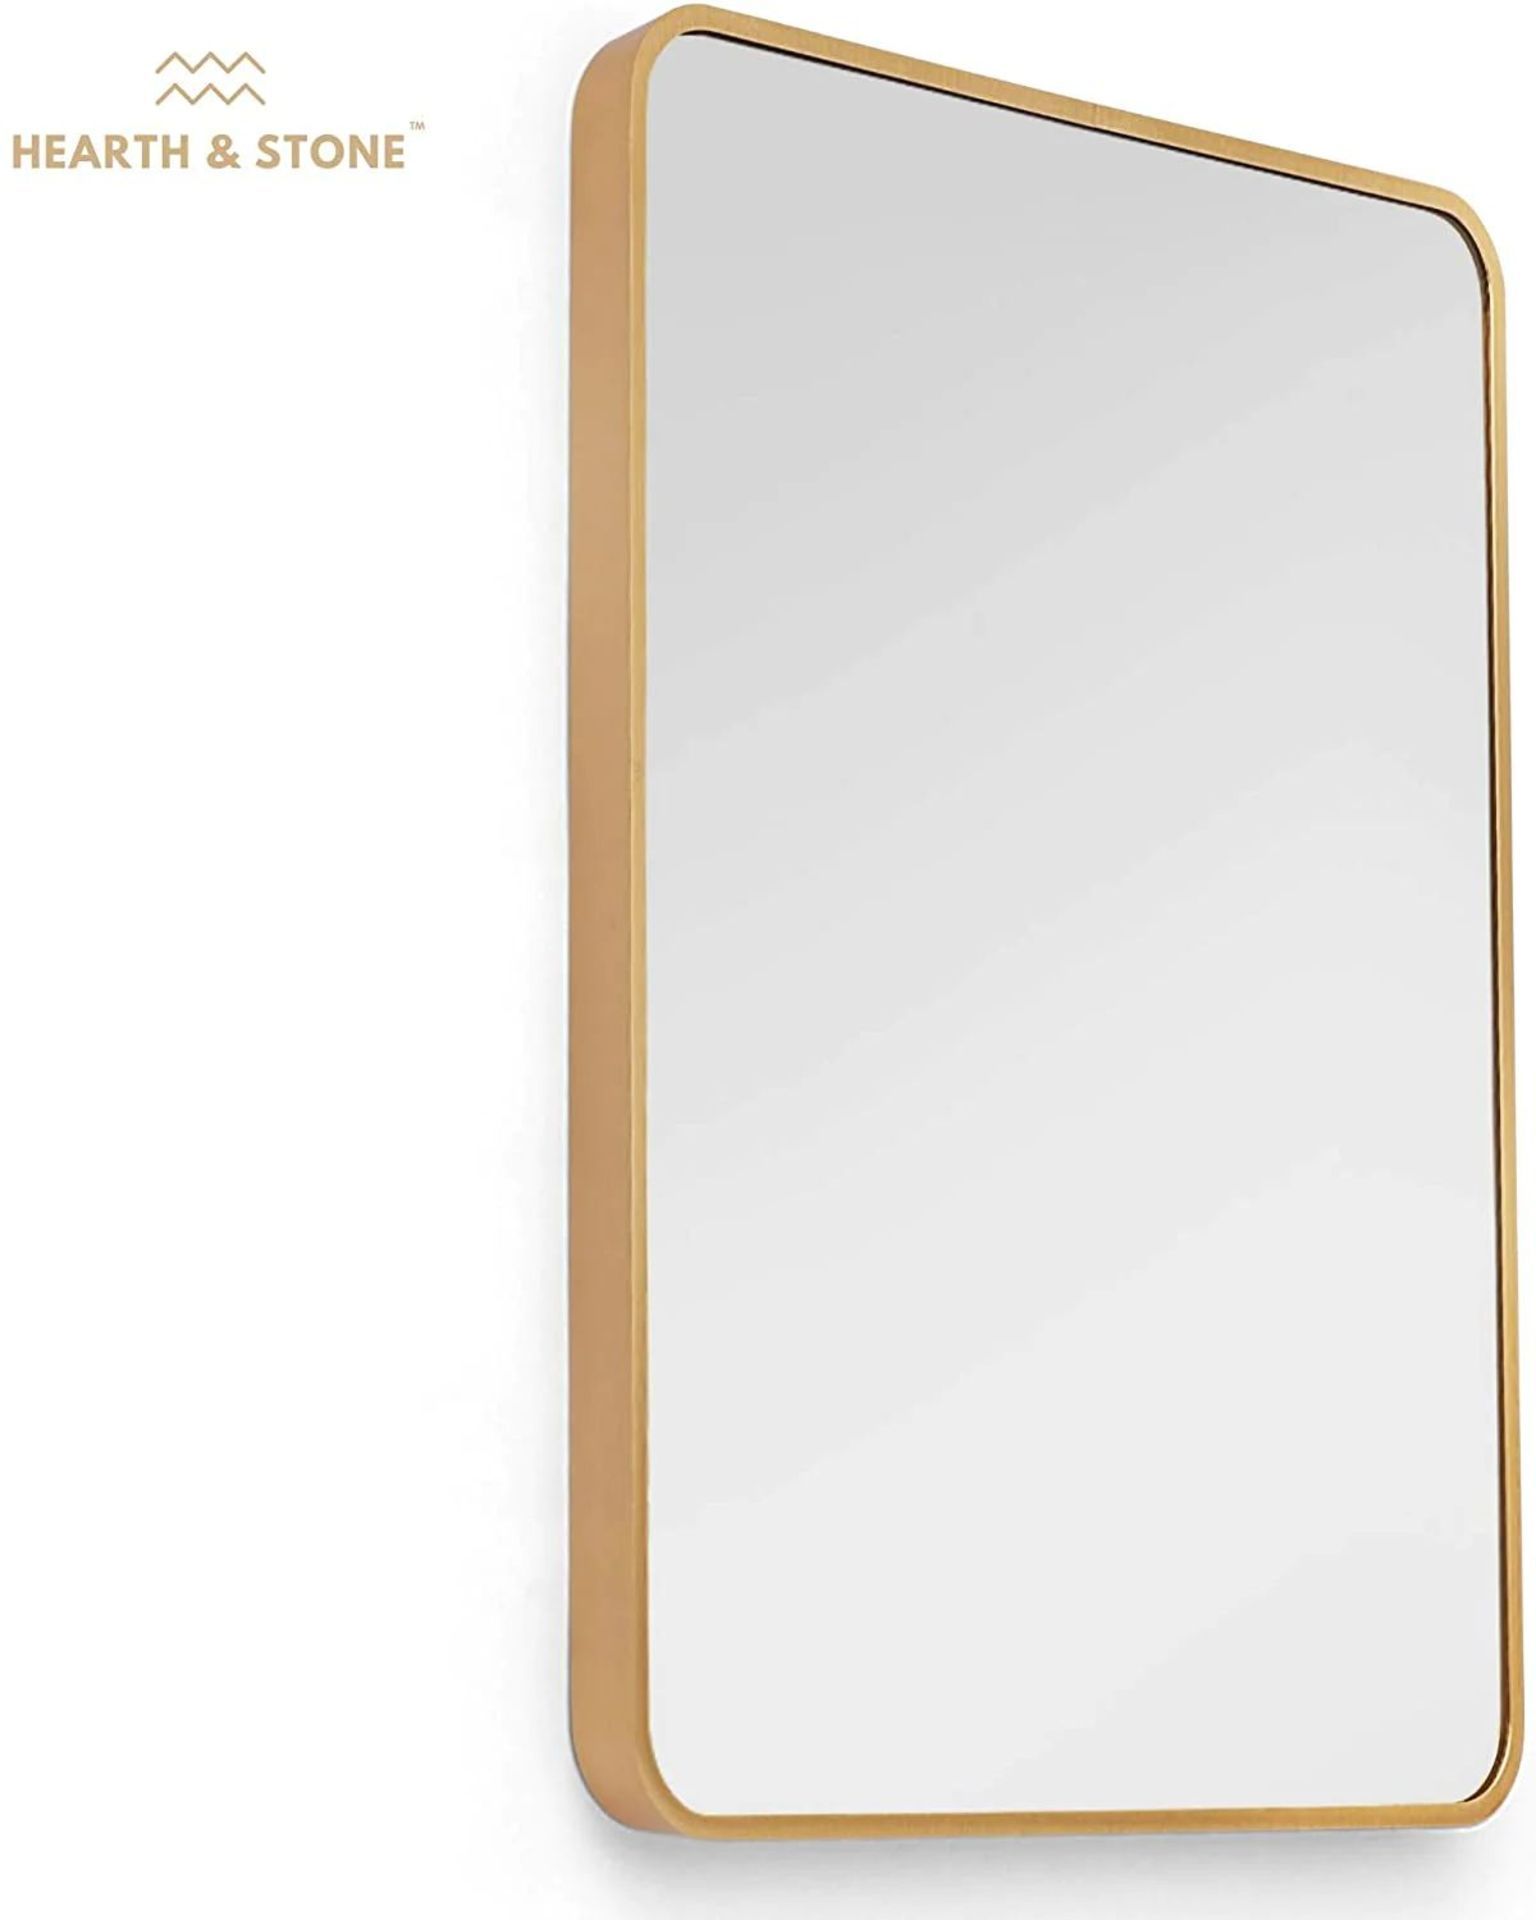 2 X BRAND NEW HEARTH AND STONE LUXURY GOLD TRIM MIRROR RRP £119 EACH R7-7